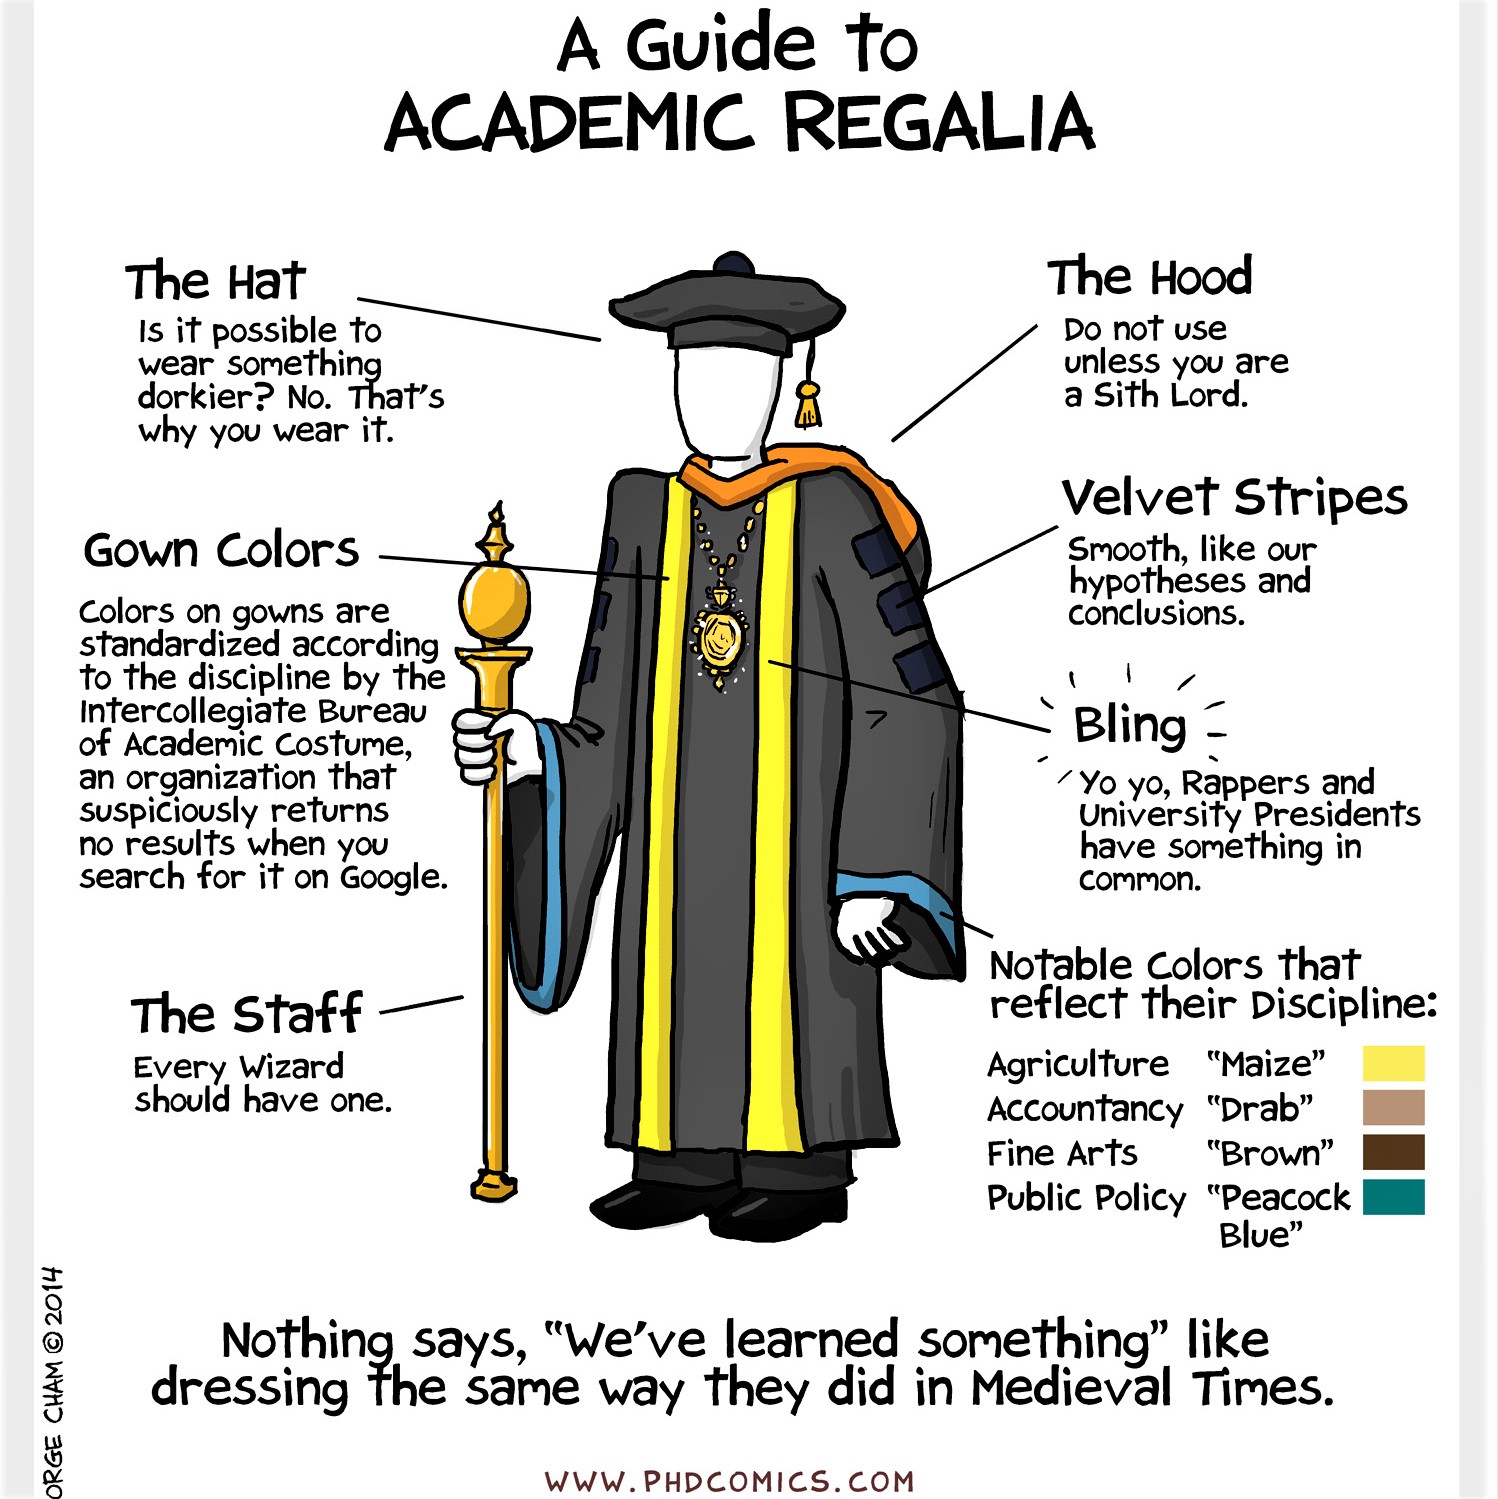 Humor: As we approach graduation season, here's a guide to academic regalia